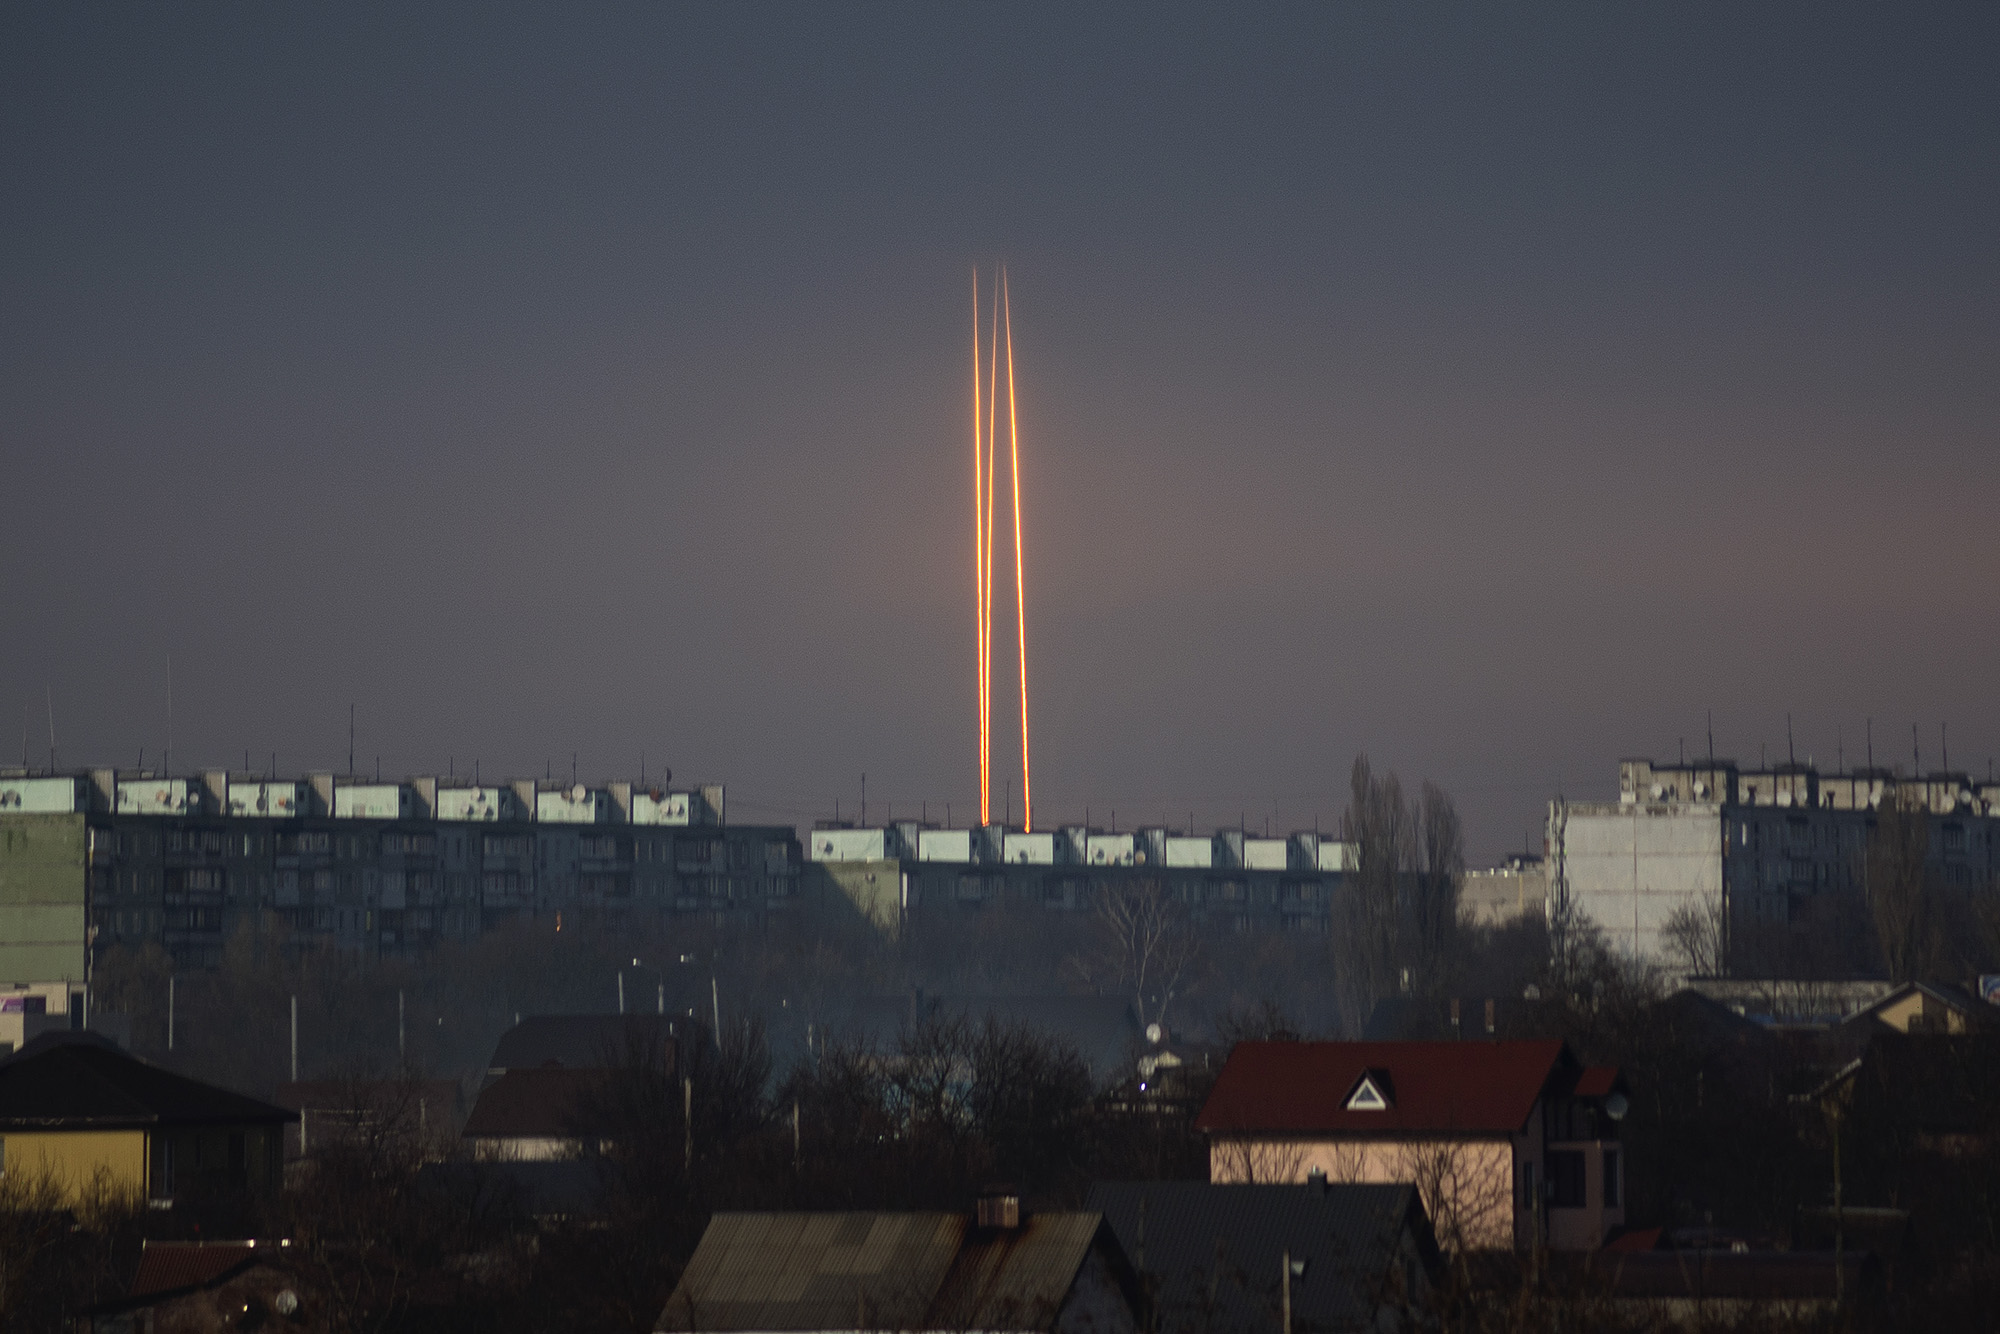 Three Russian rockets launched From Russia's Belgorod region are seen at dawn in Kharkiv, Ukraine, on March 9.